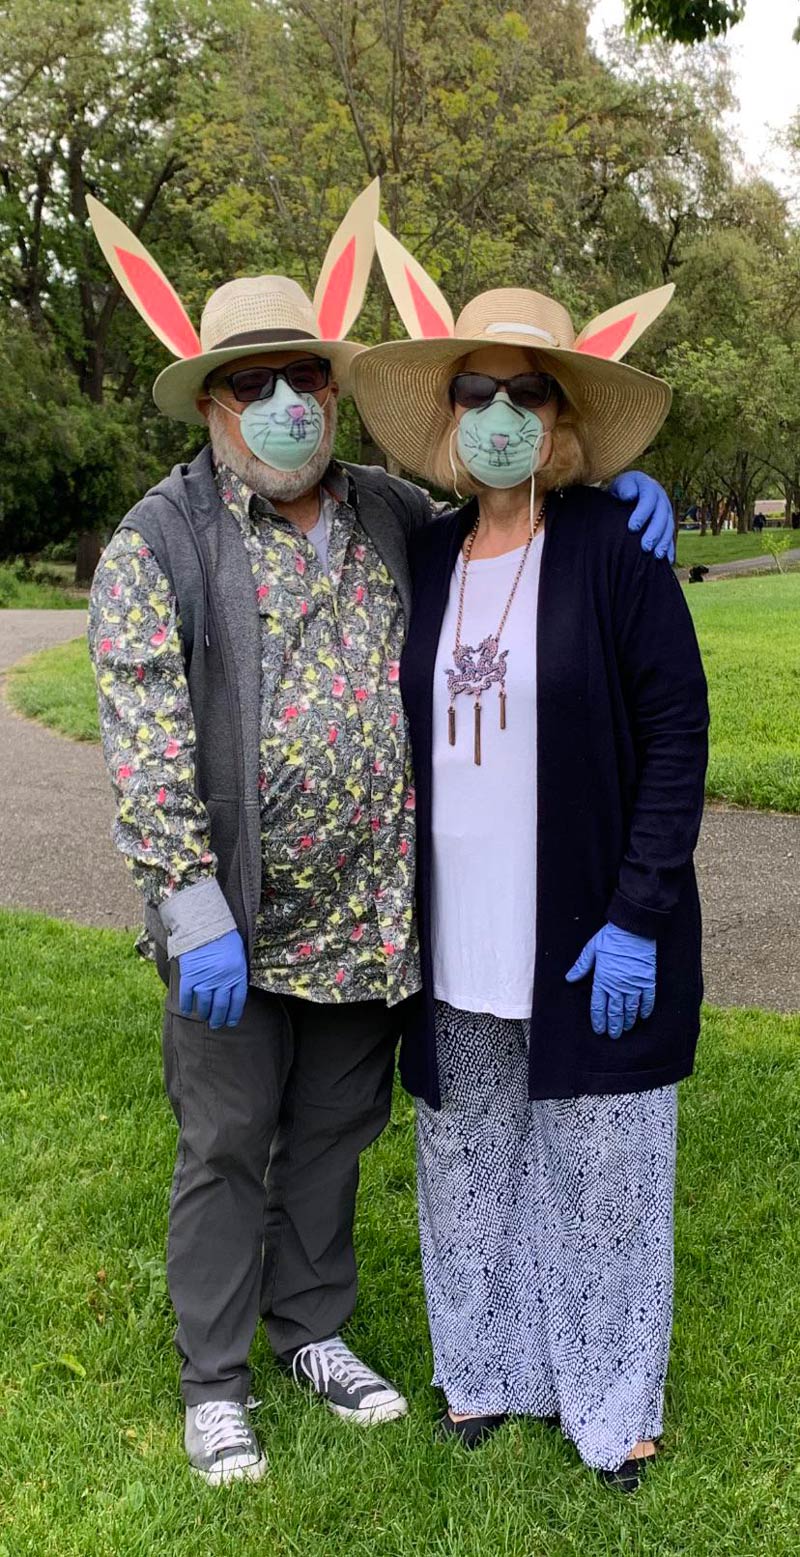 My parents really wanted to watch my son hunt for eggs. I told them they had to wear gloves & masks just to be safe. They showed up wearing this!